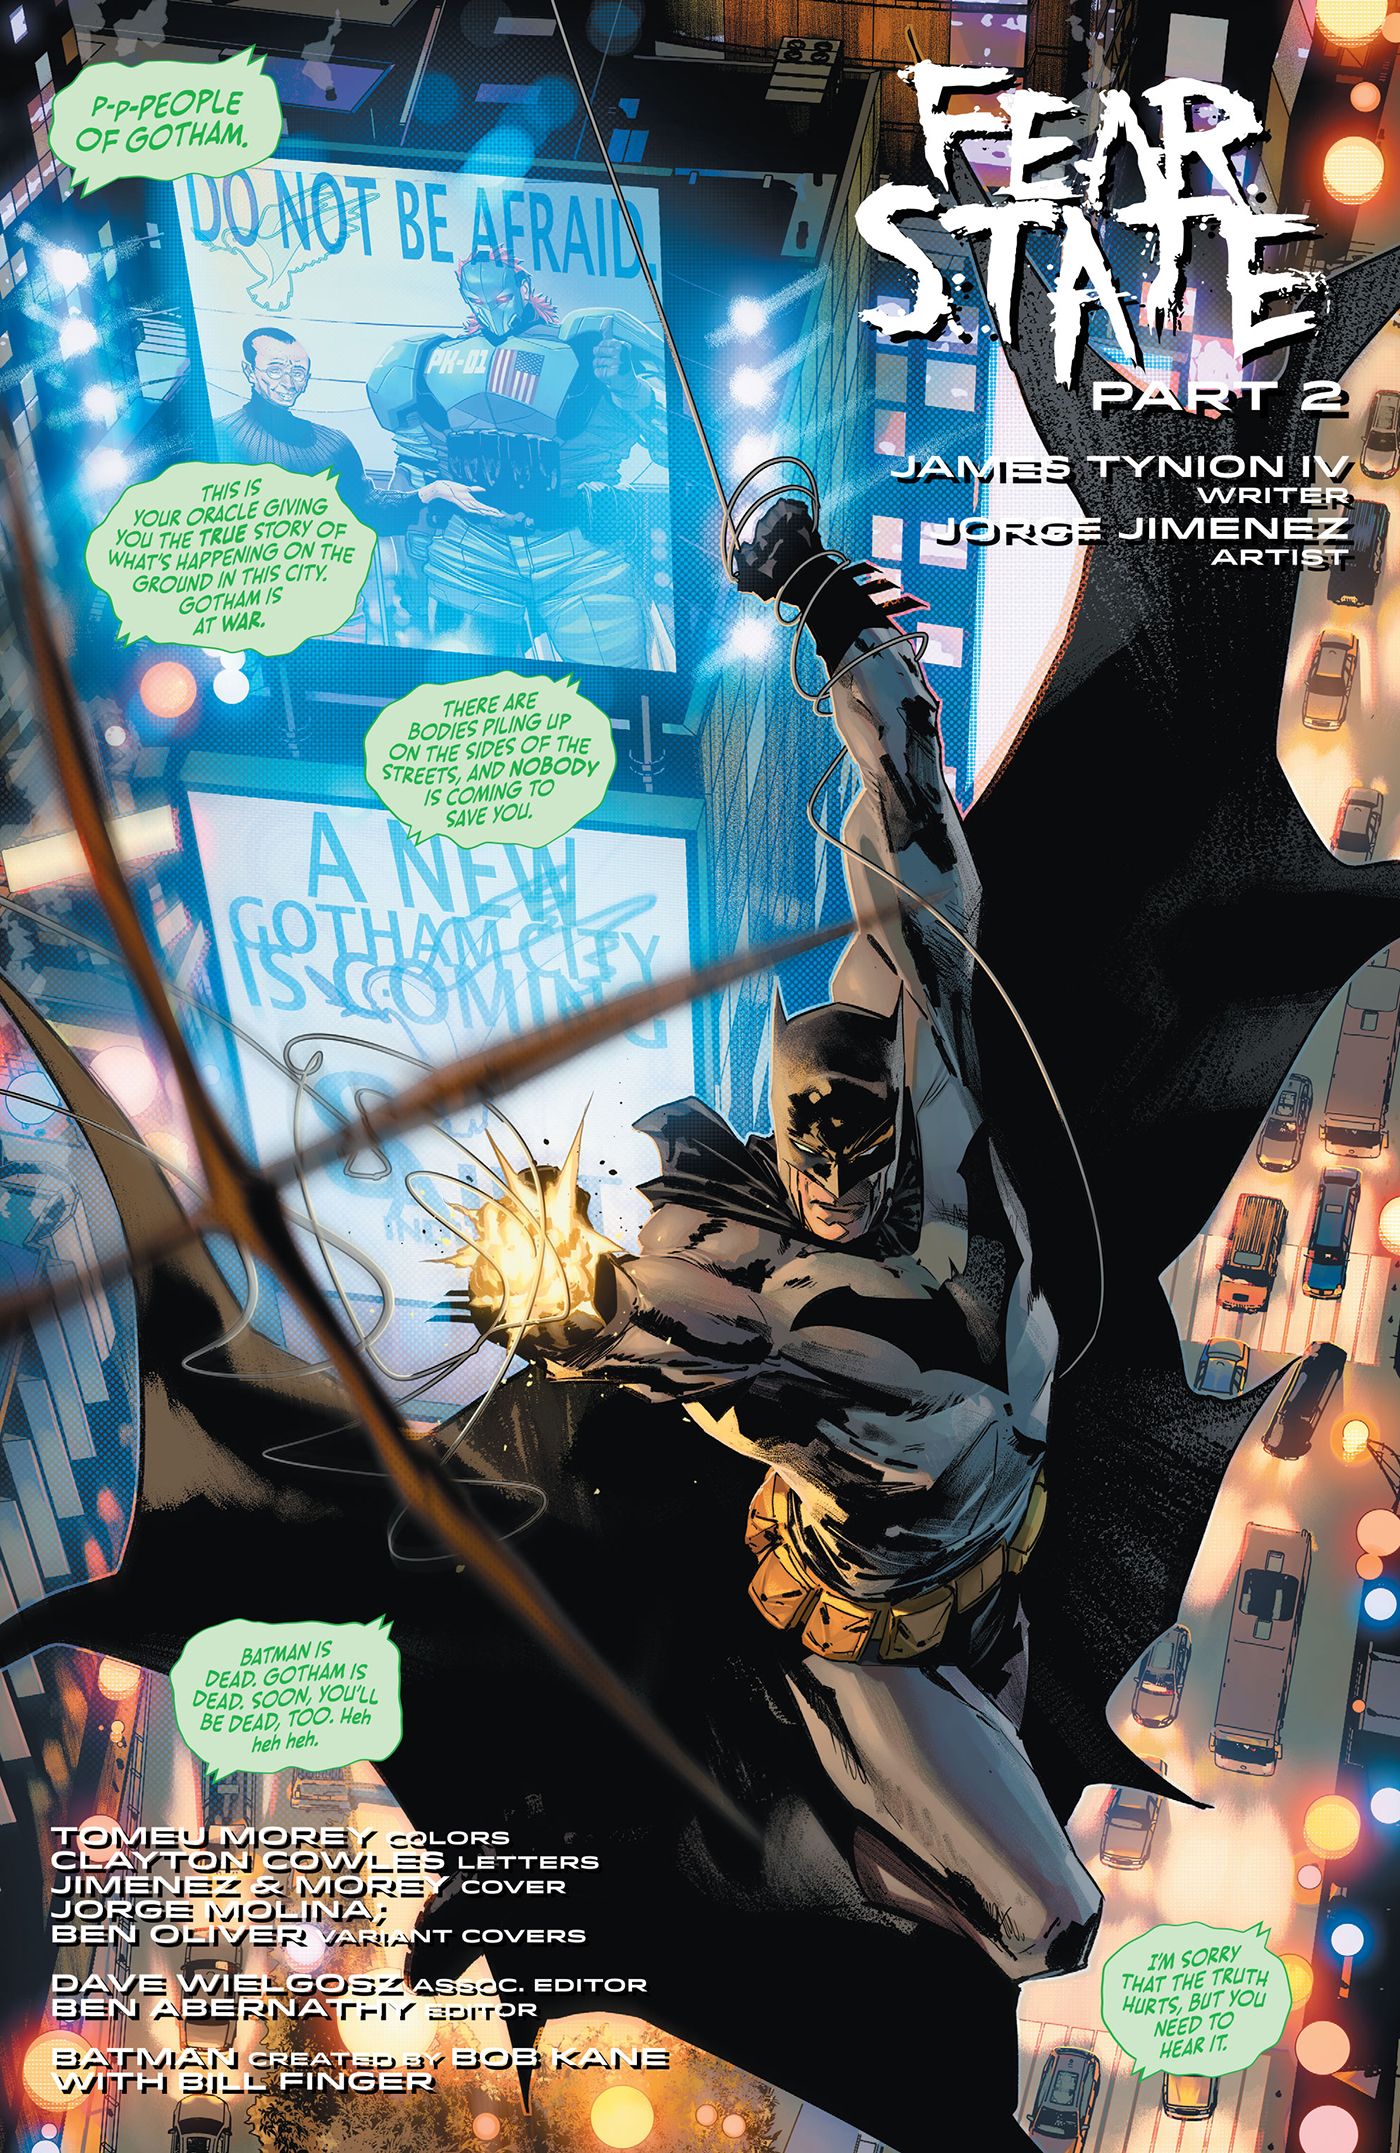 Batman swings through Gotham as the anti-Oracle induces fear and panic.